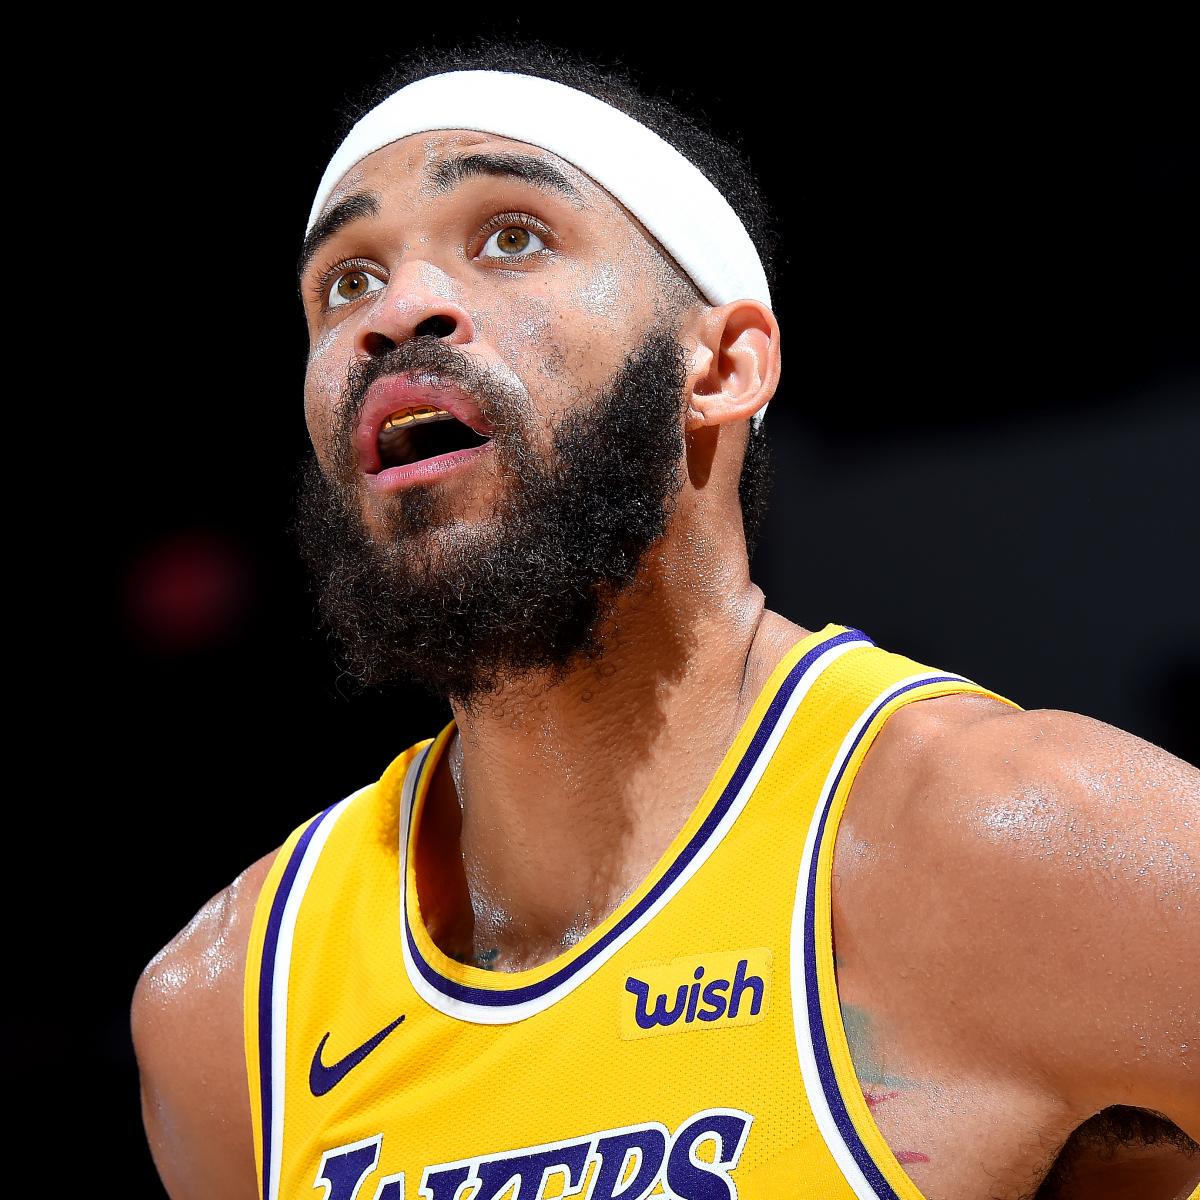 Lakers' JaVale McGee Feels NBA Doesn't Want Big Men in the League